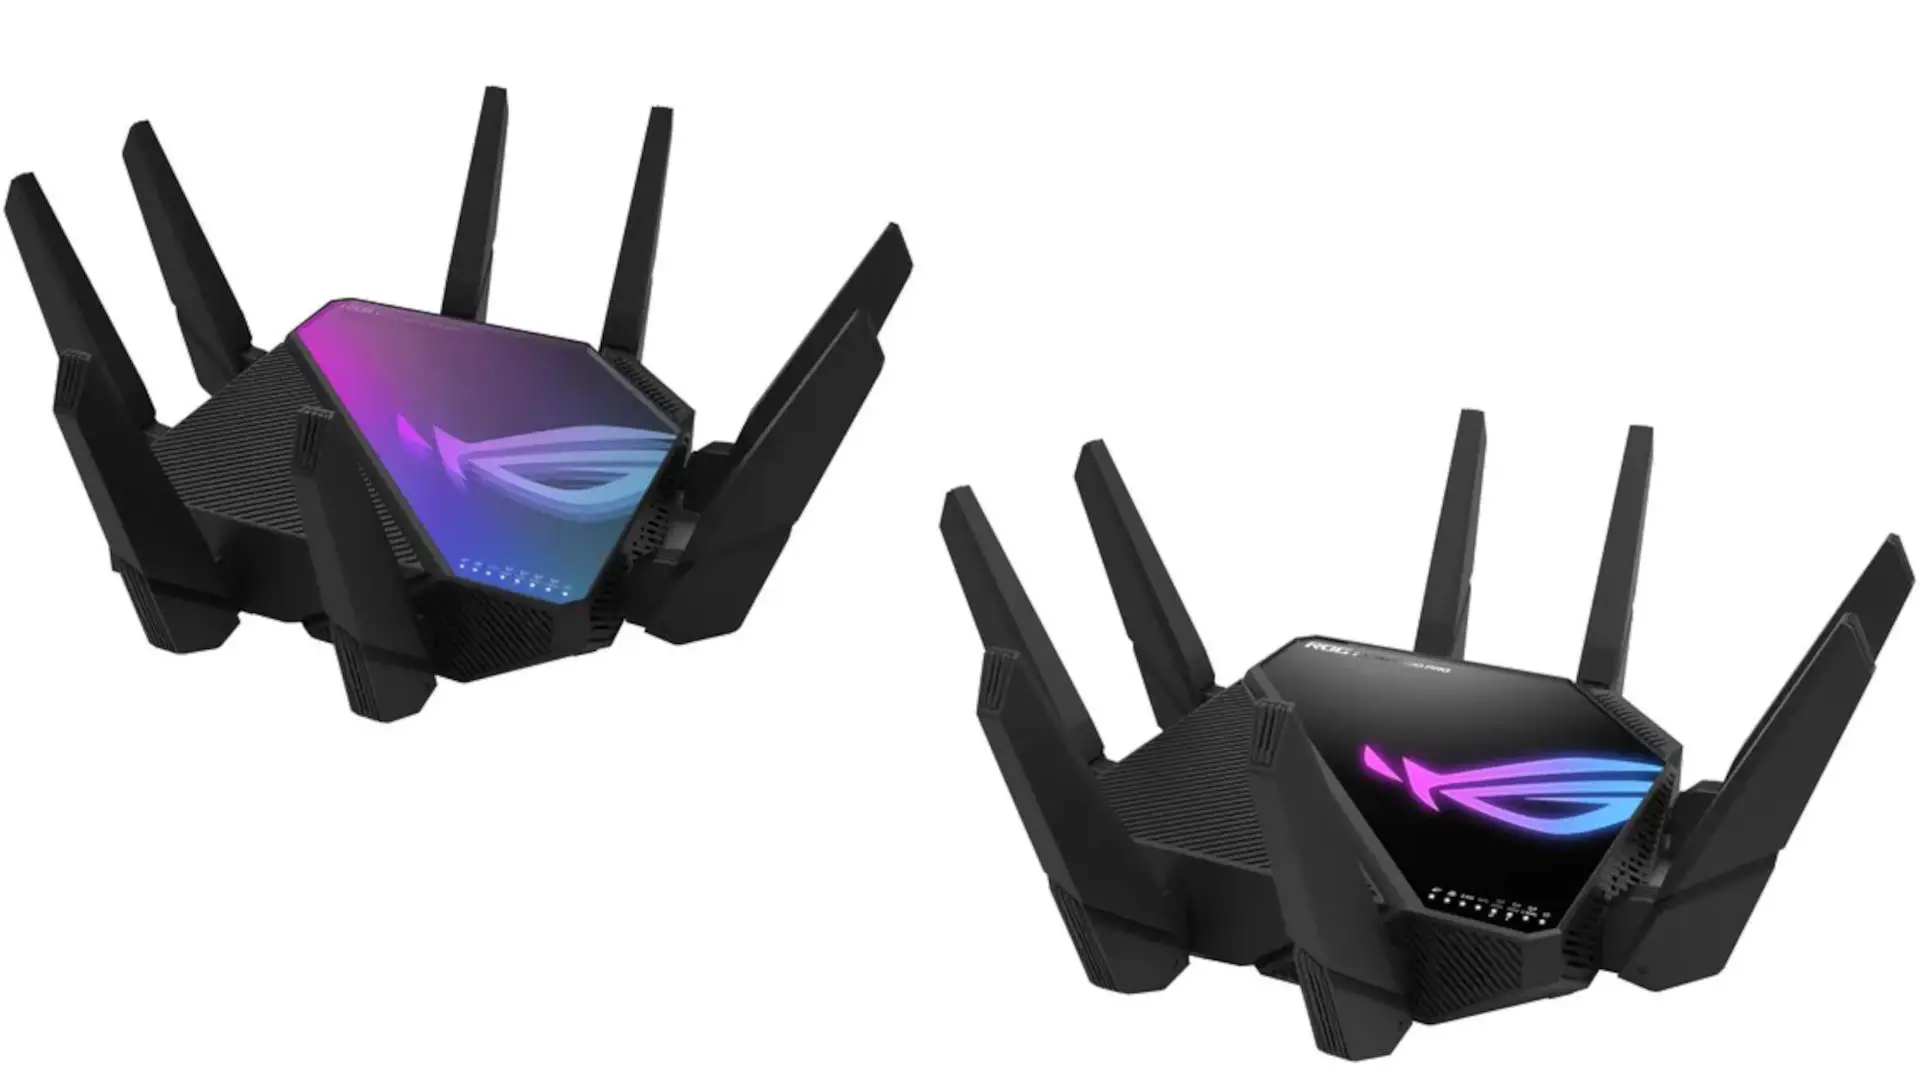 ASUS ROG Rapture GT AX11000 PRO Router 3